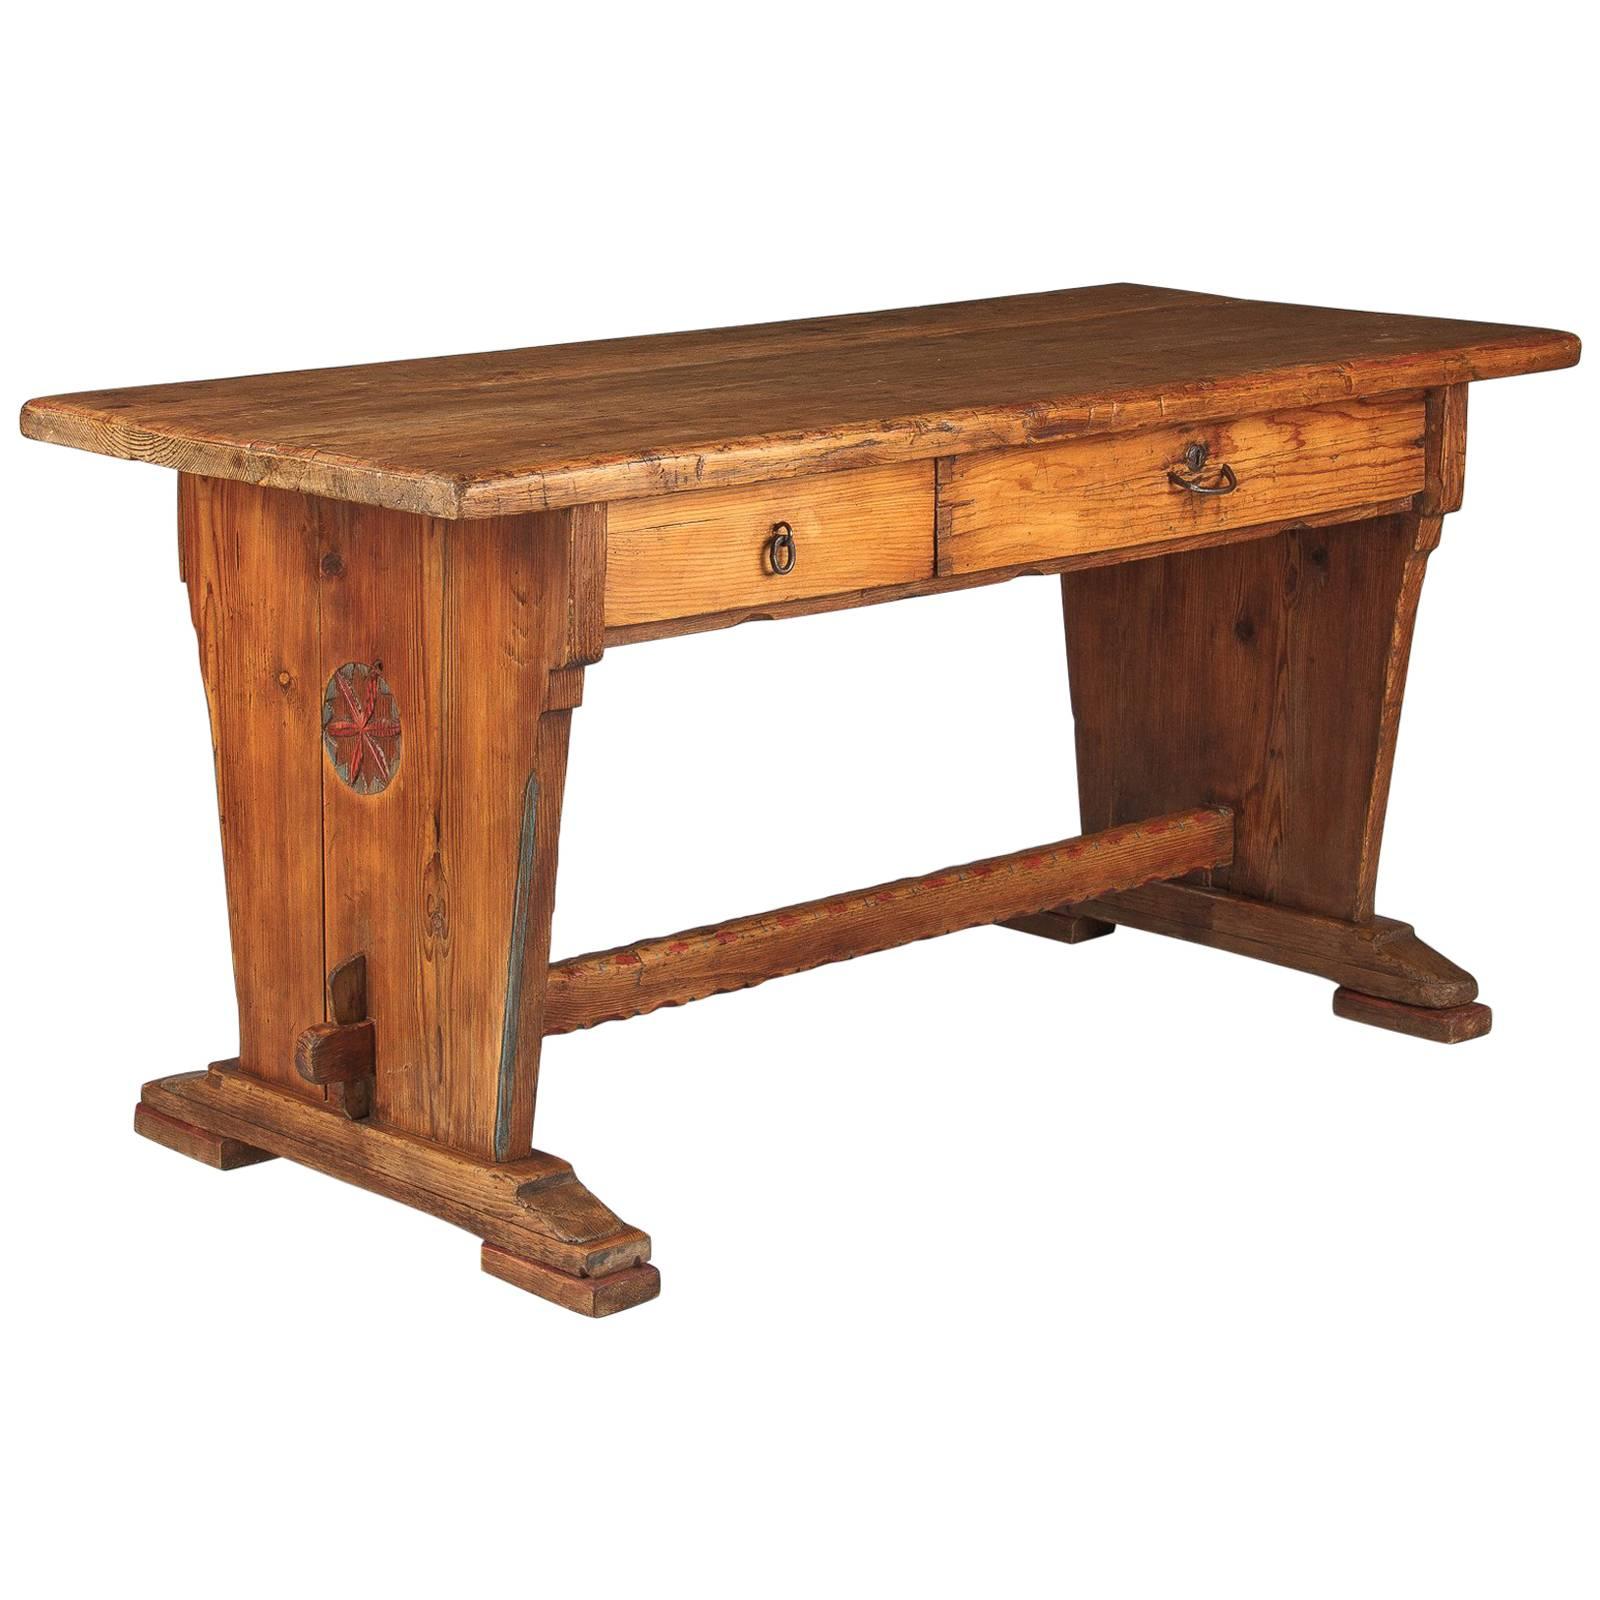 Country French Rustic Larchwood Desk, Mid-1800s